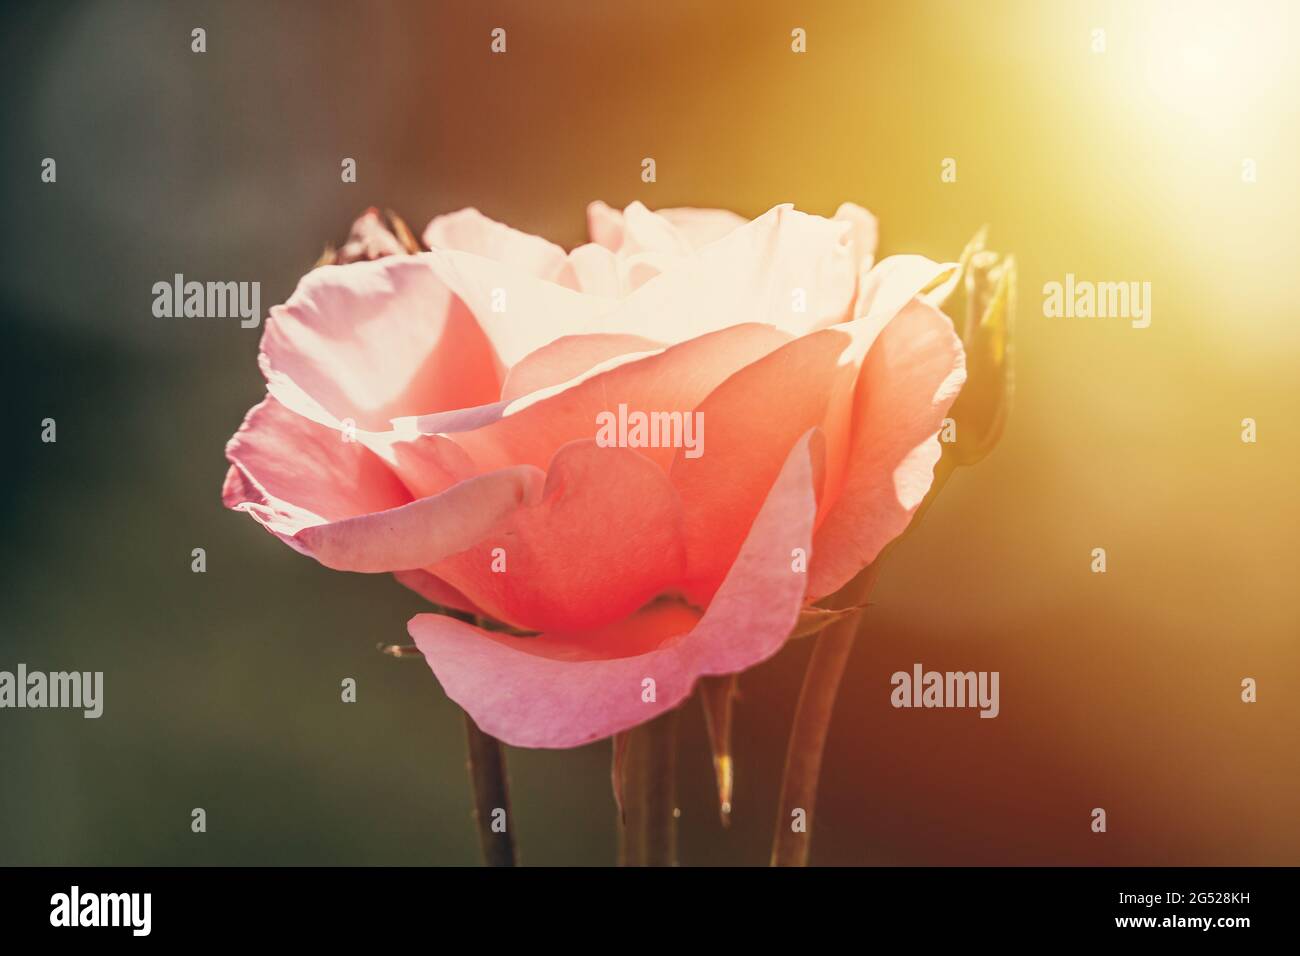 Pink rose lit by morning sun background Stock Photo